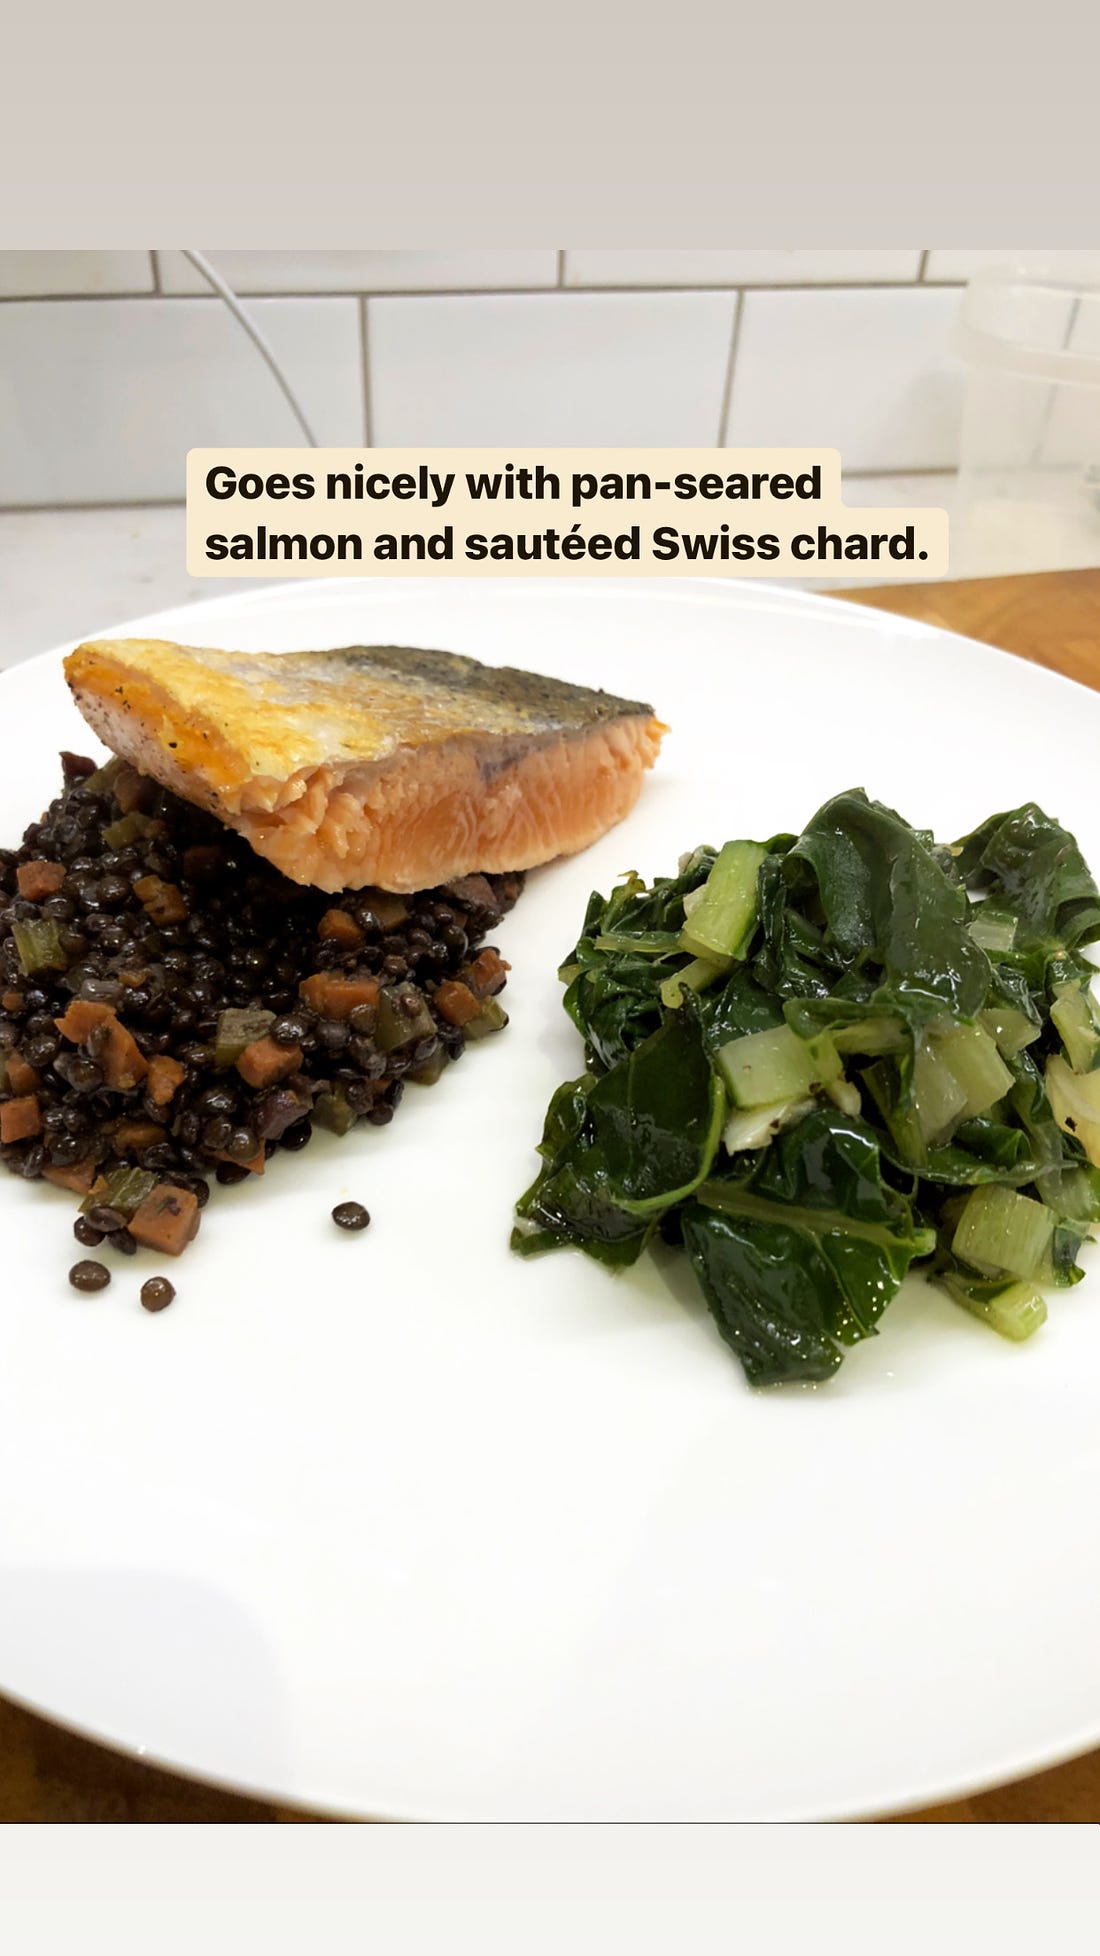 Lentils served with salmon and Swiss chard